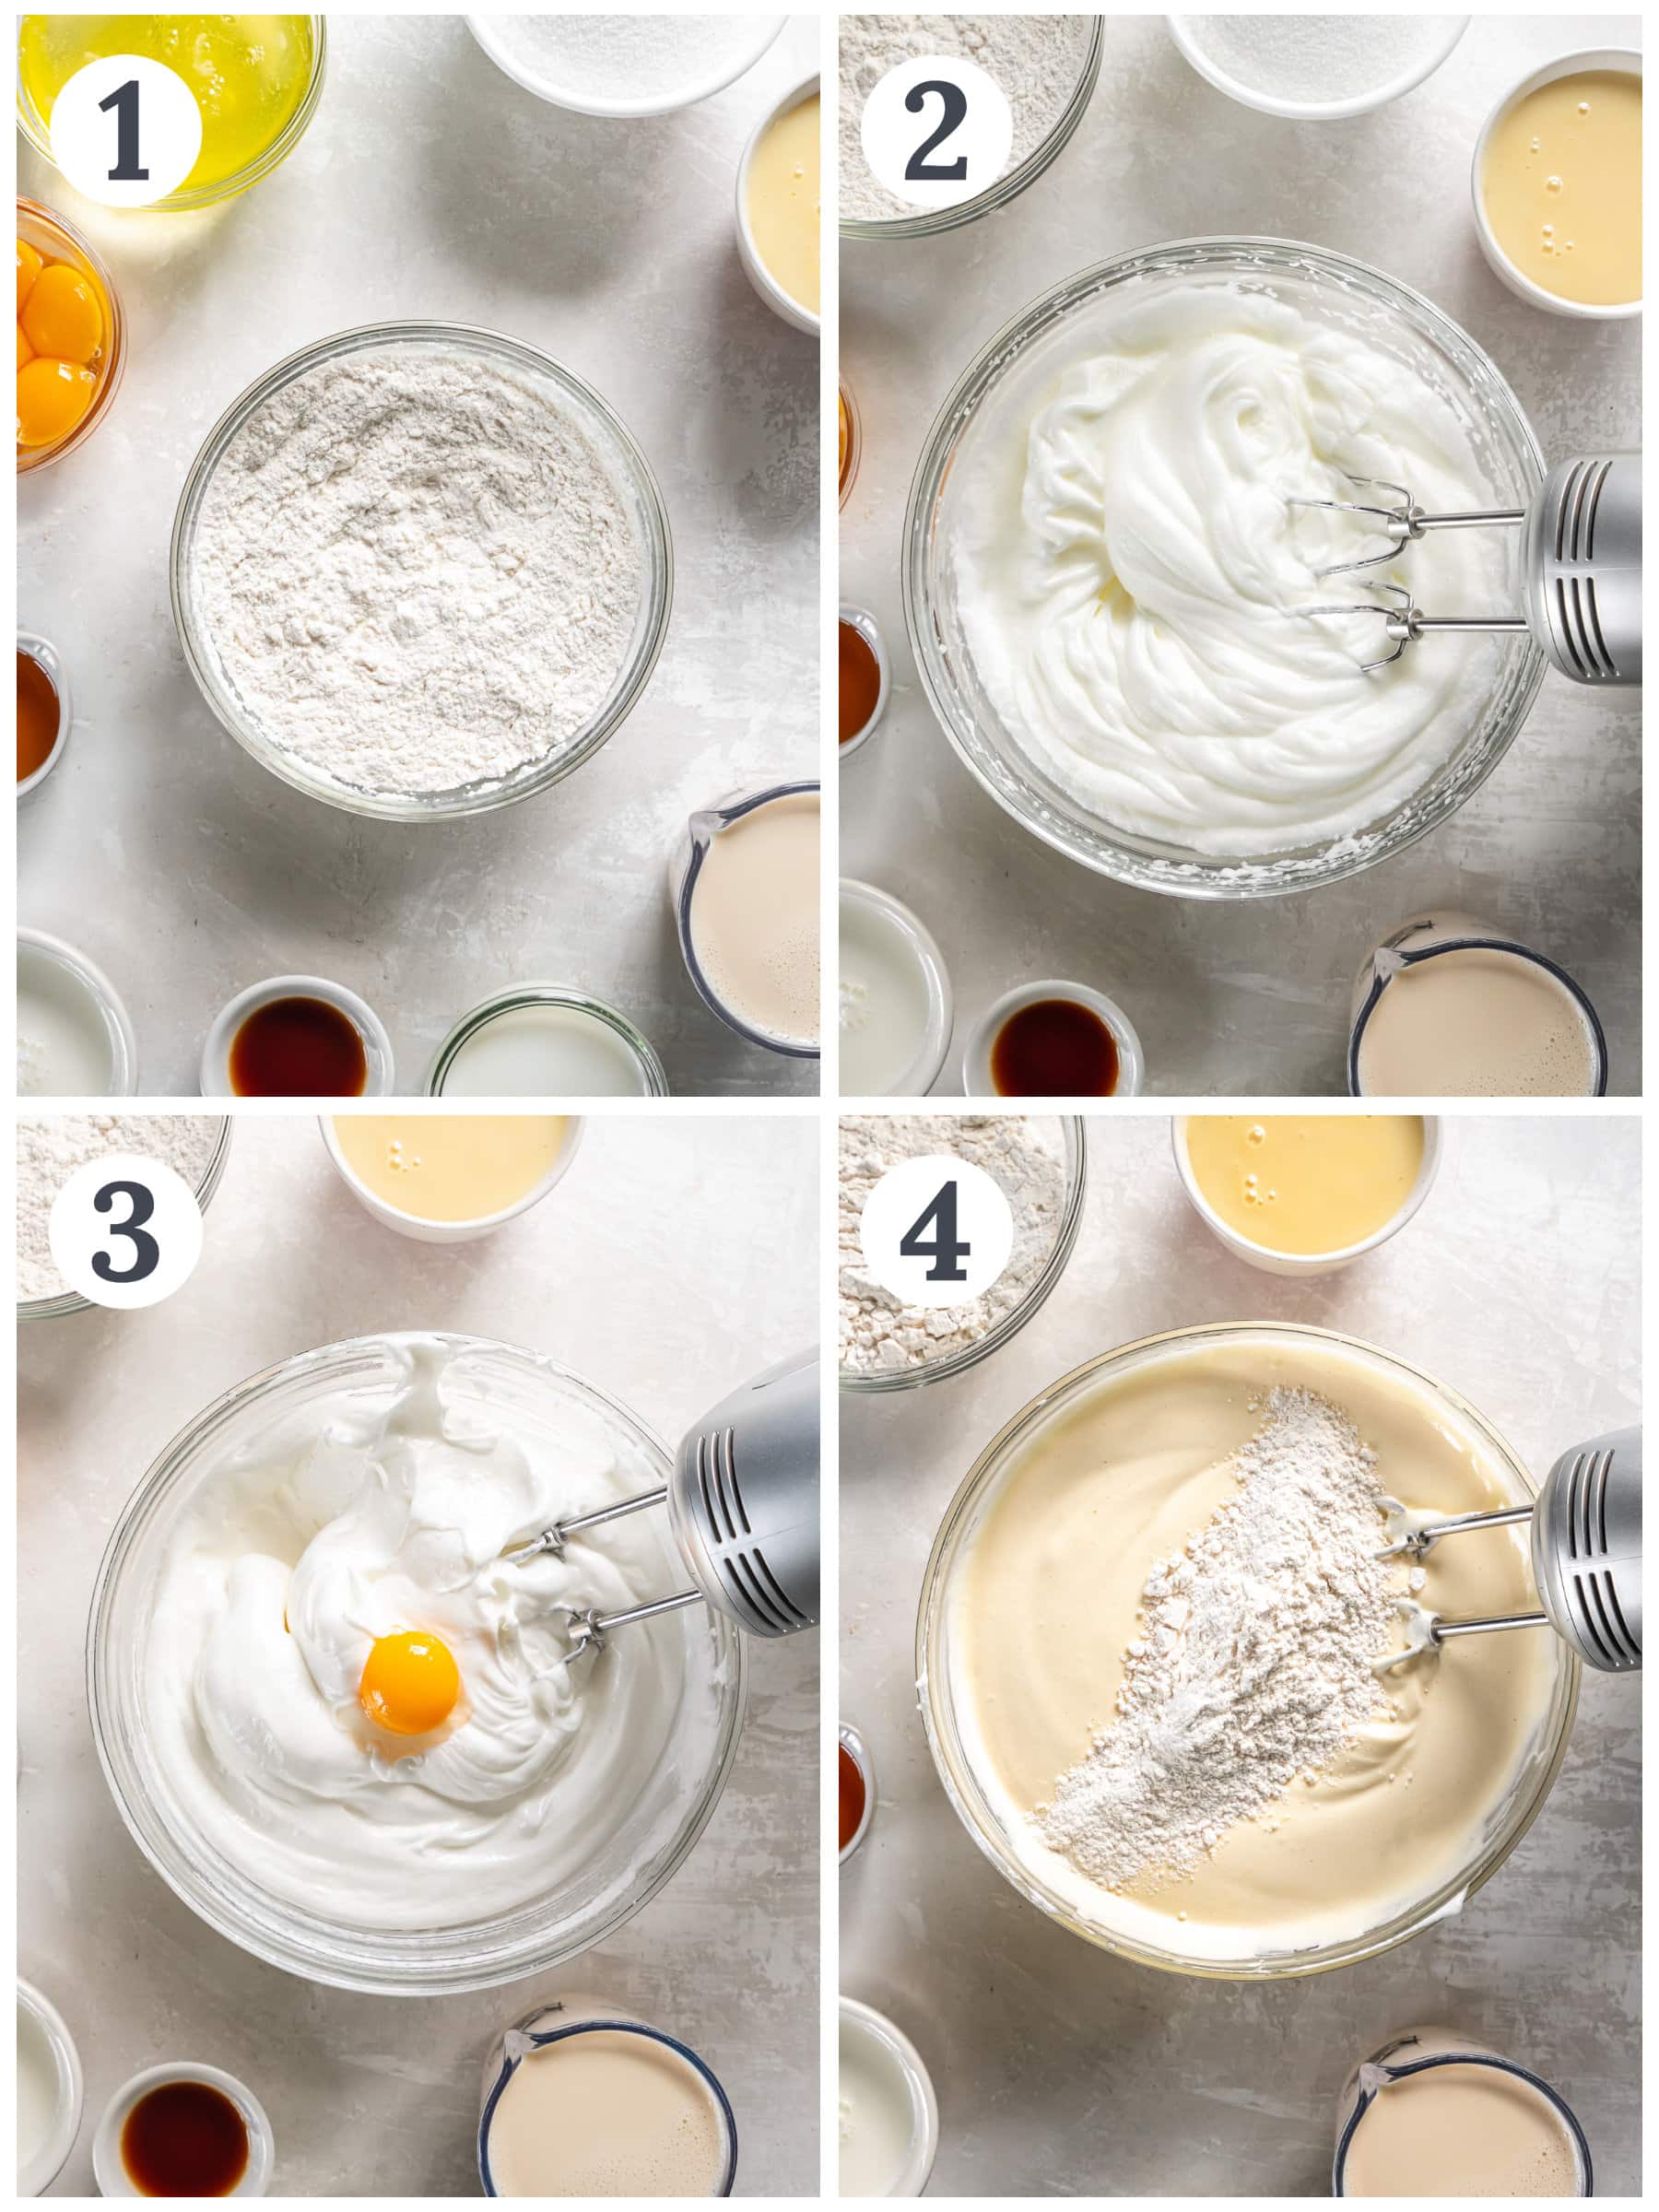 photo collage demonstrating how to make tres leches cake in a mixing bowl with a hand mixer.